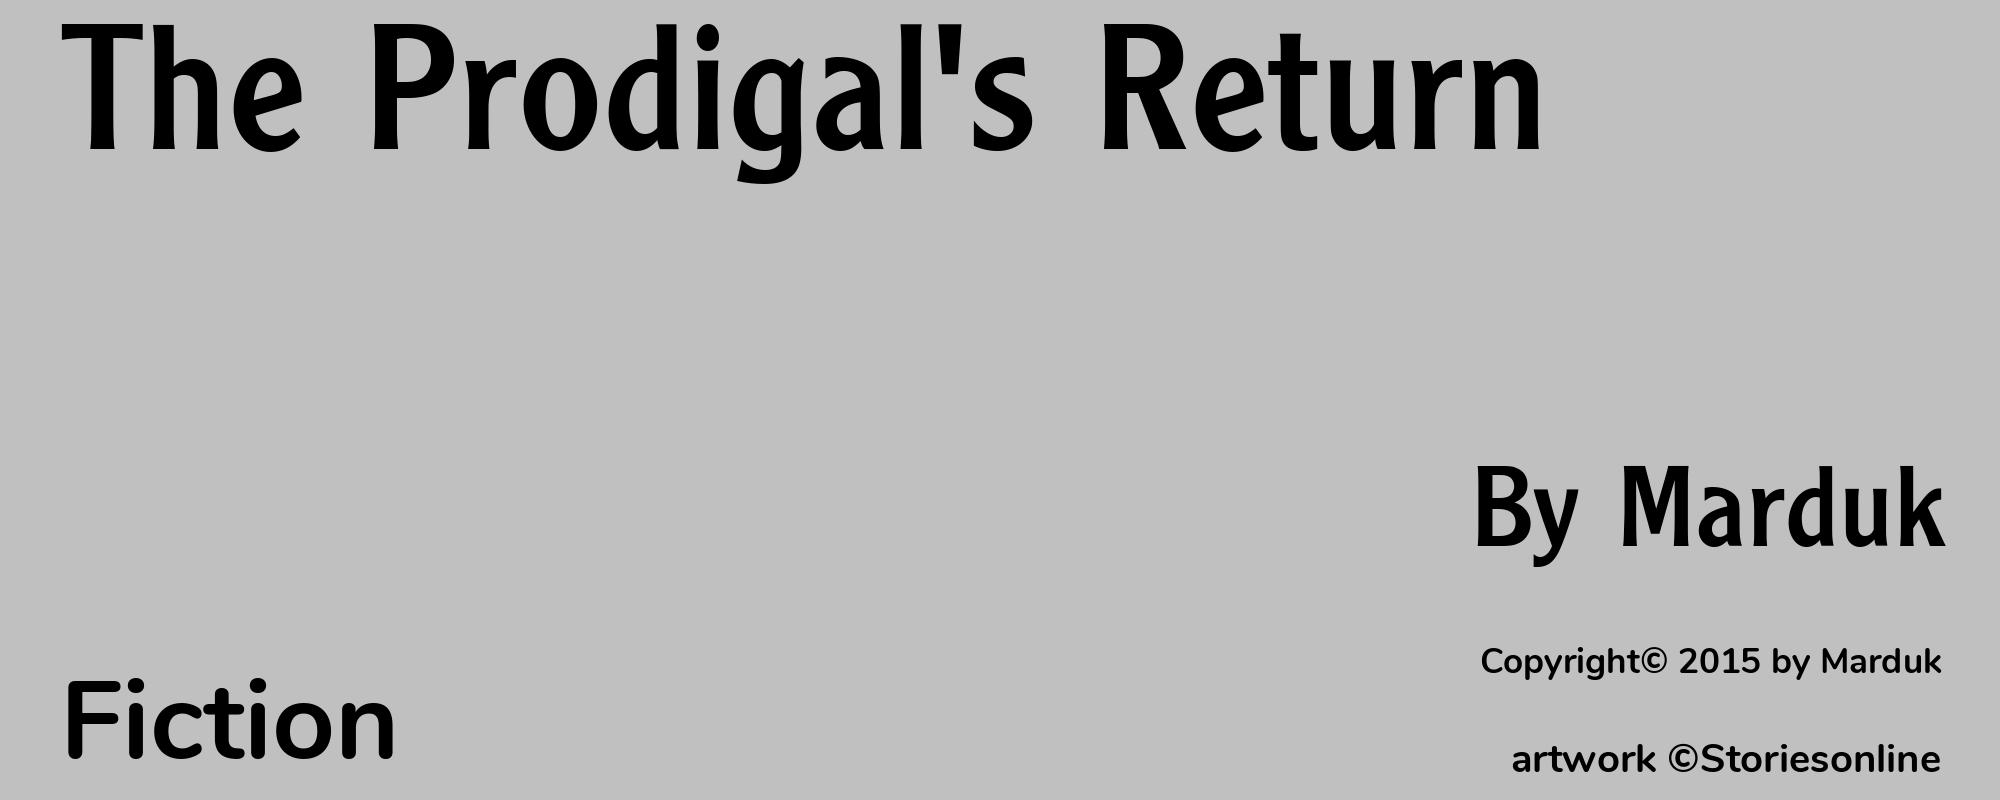 The Prodigal's Return - Cover